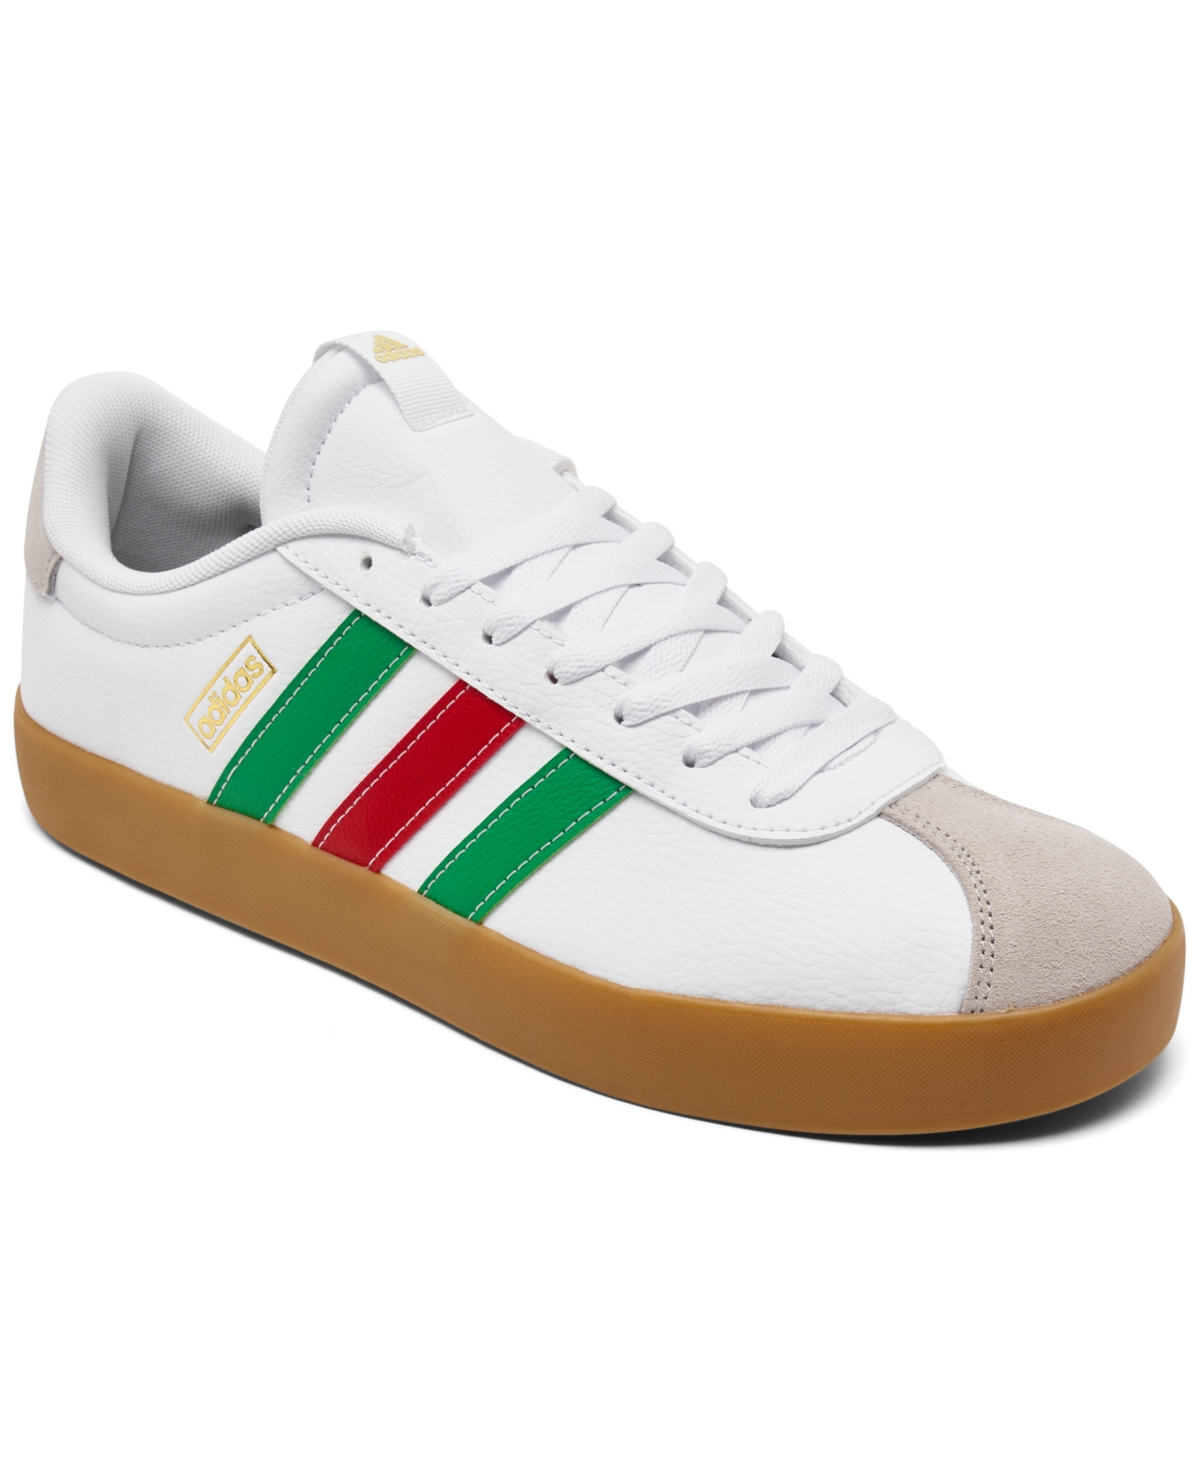 Men's Casual Sneakers from Finish Line - White/Green/Red